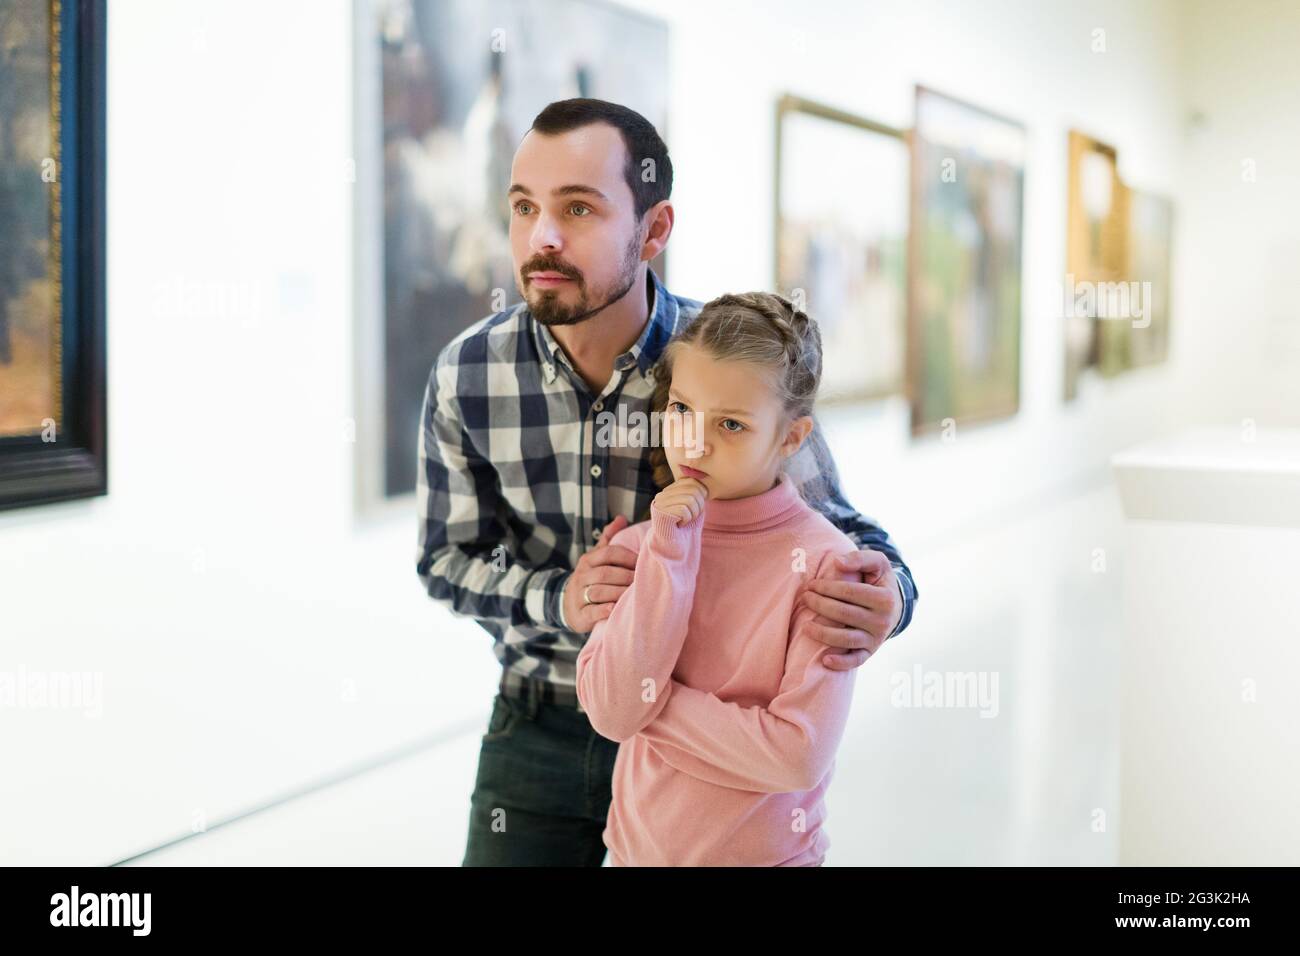 Father and daughter looking at expositions Stock Photo